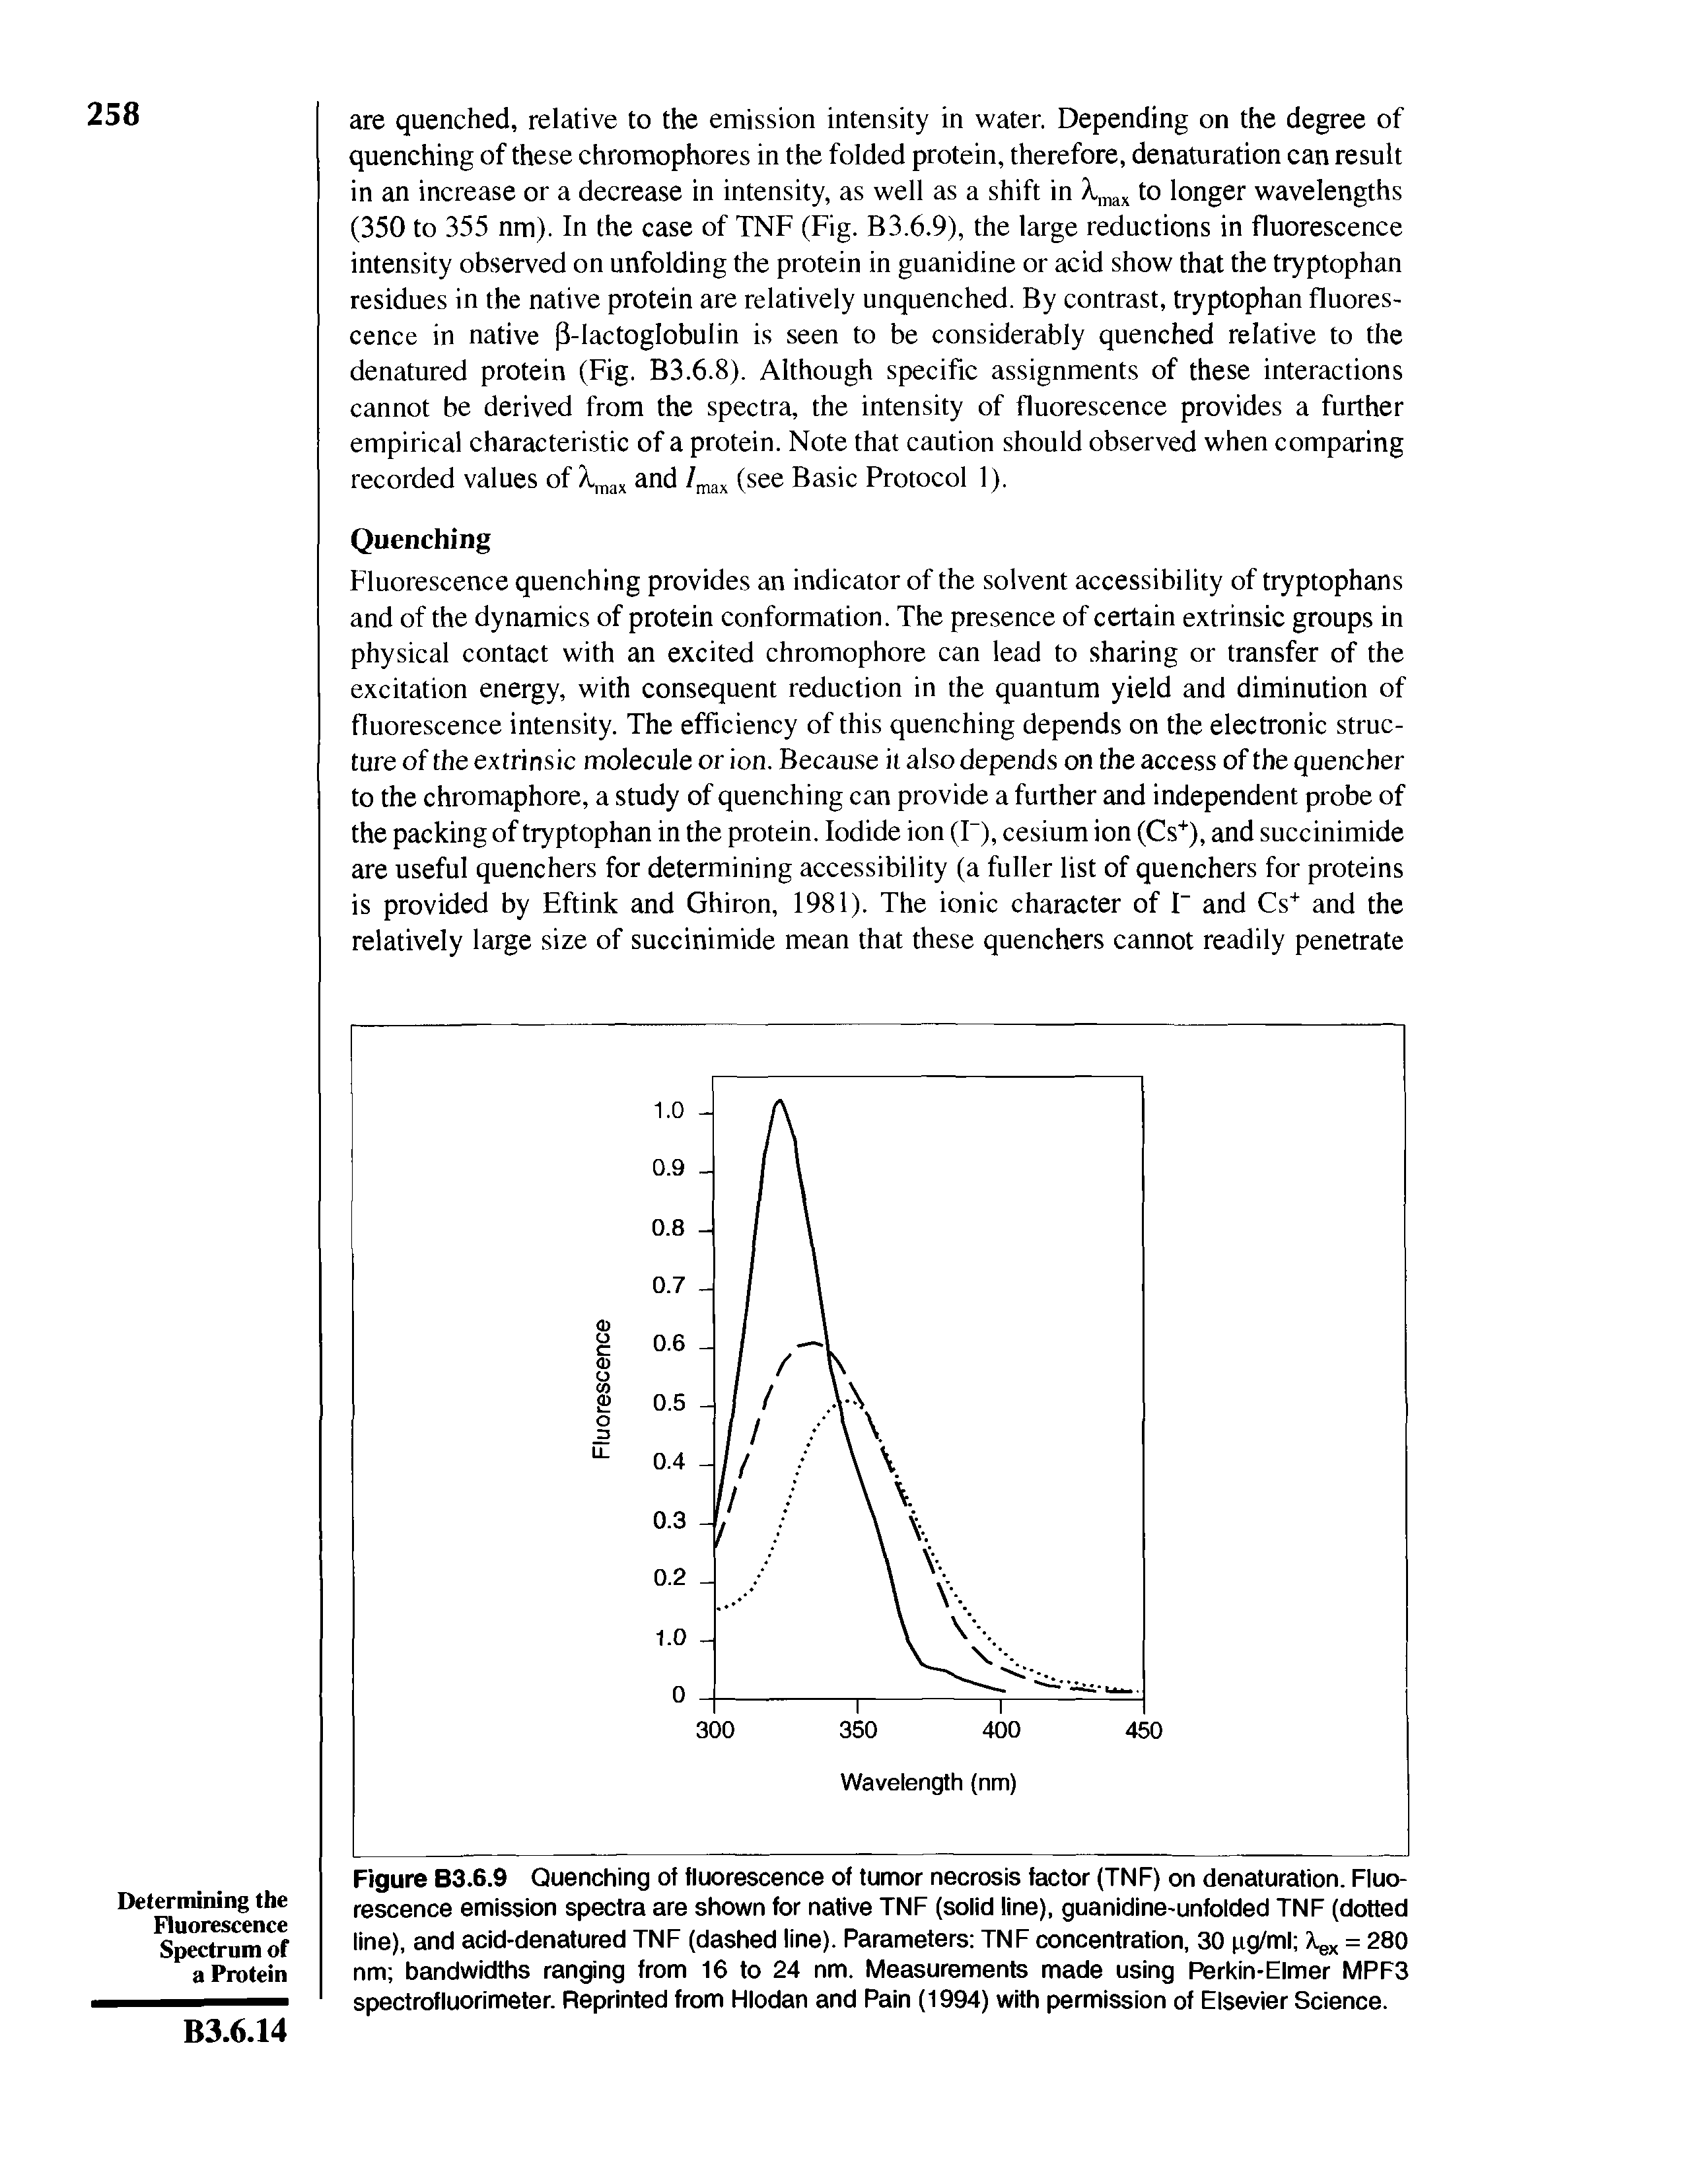 Figure B3.6.9 Quenching of fluorescence of tumor necrosis factor (TNF) on denaturation. Fluorescence emission spectra are shown for native TNF (solid line), guanidine-unfolded TNF (dotted line), and acid-denatured TNF (dashed line). Parameters TNF concentration, 30 pg/ml Xex = 280 nm bandwidths ranging from 16 to 24 nm. Measurements made using Perkin-Elmer MPF3 spectrofluorimeter. Reprinted from Hlodan and Pain (1994) with permission of Elsevier Science.